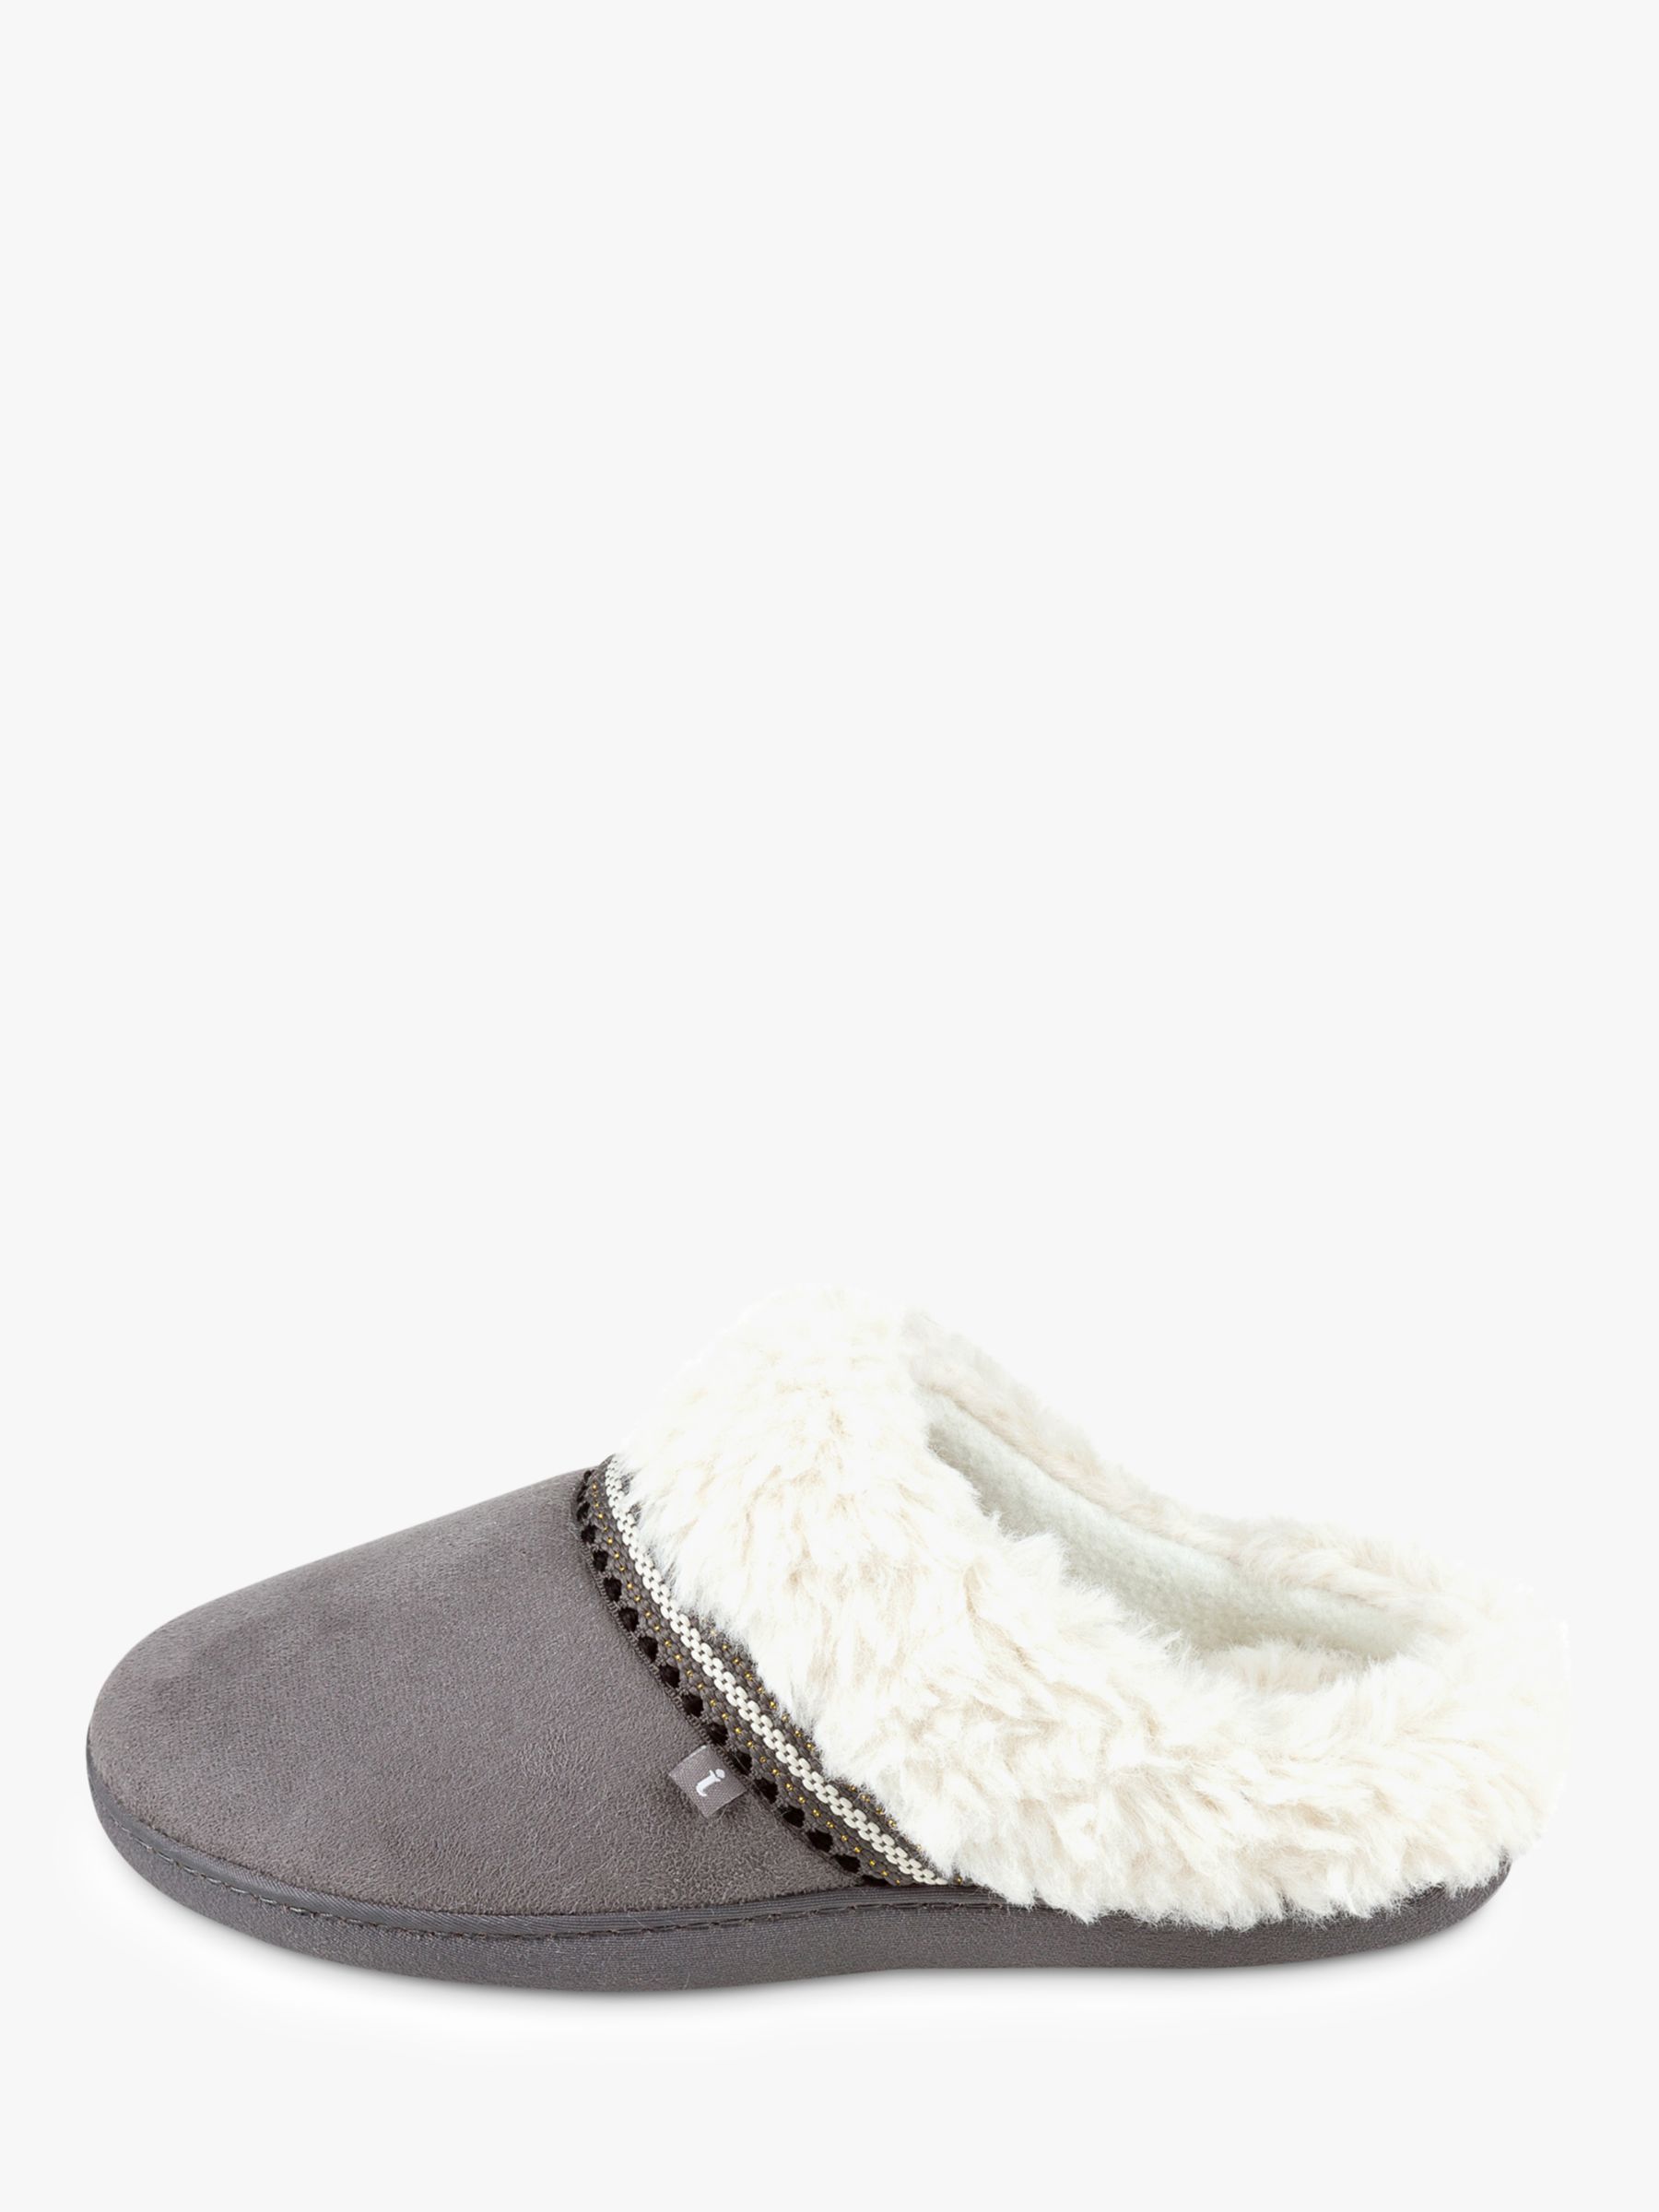 totes Suedette Mule Slippers, Grey at John Lewis & Partners